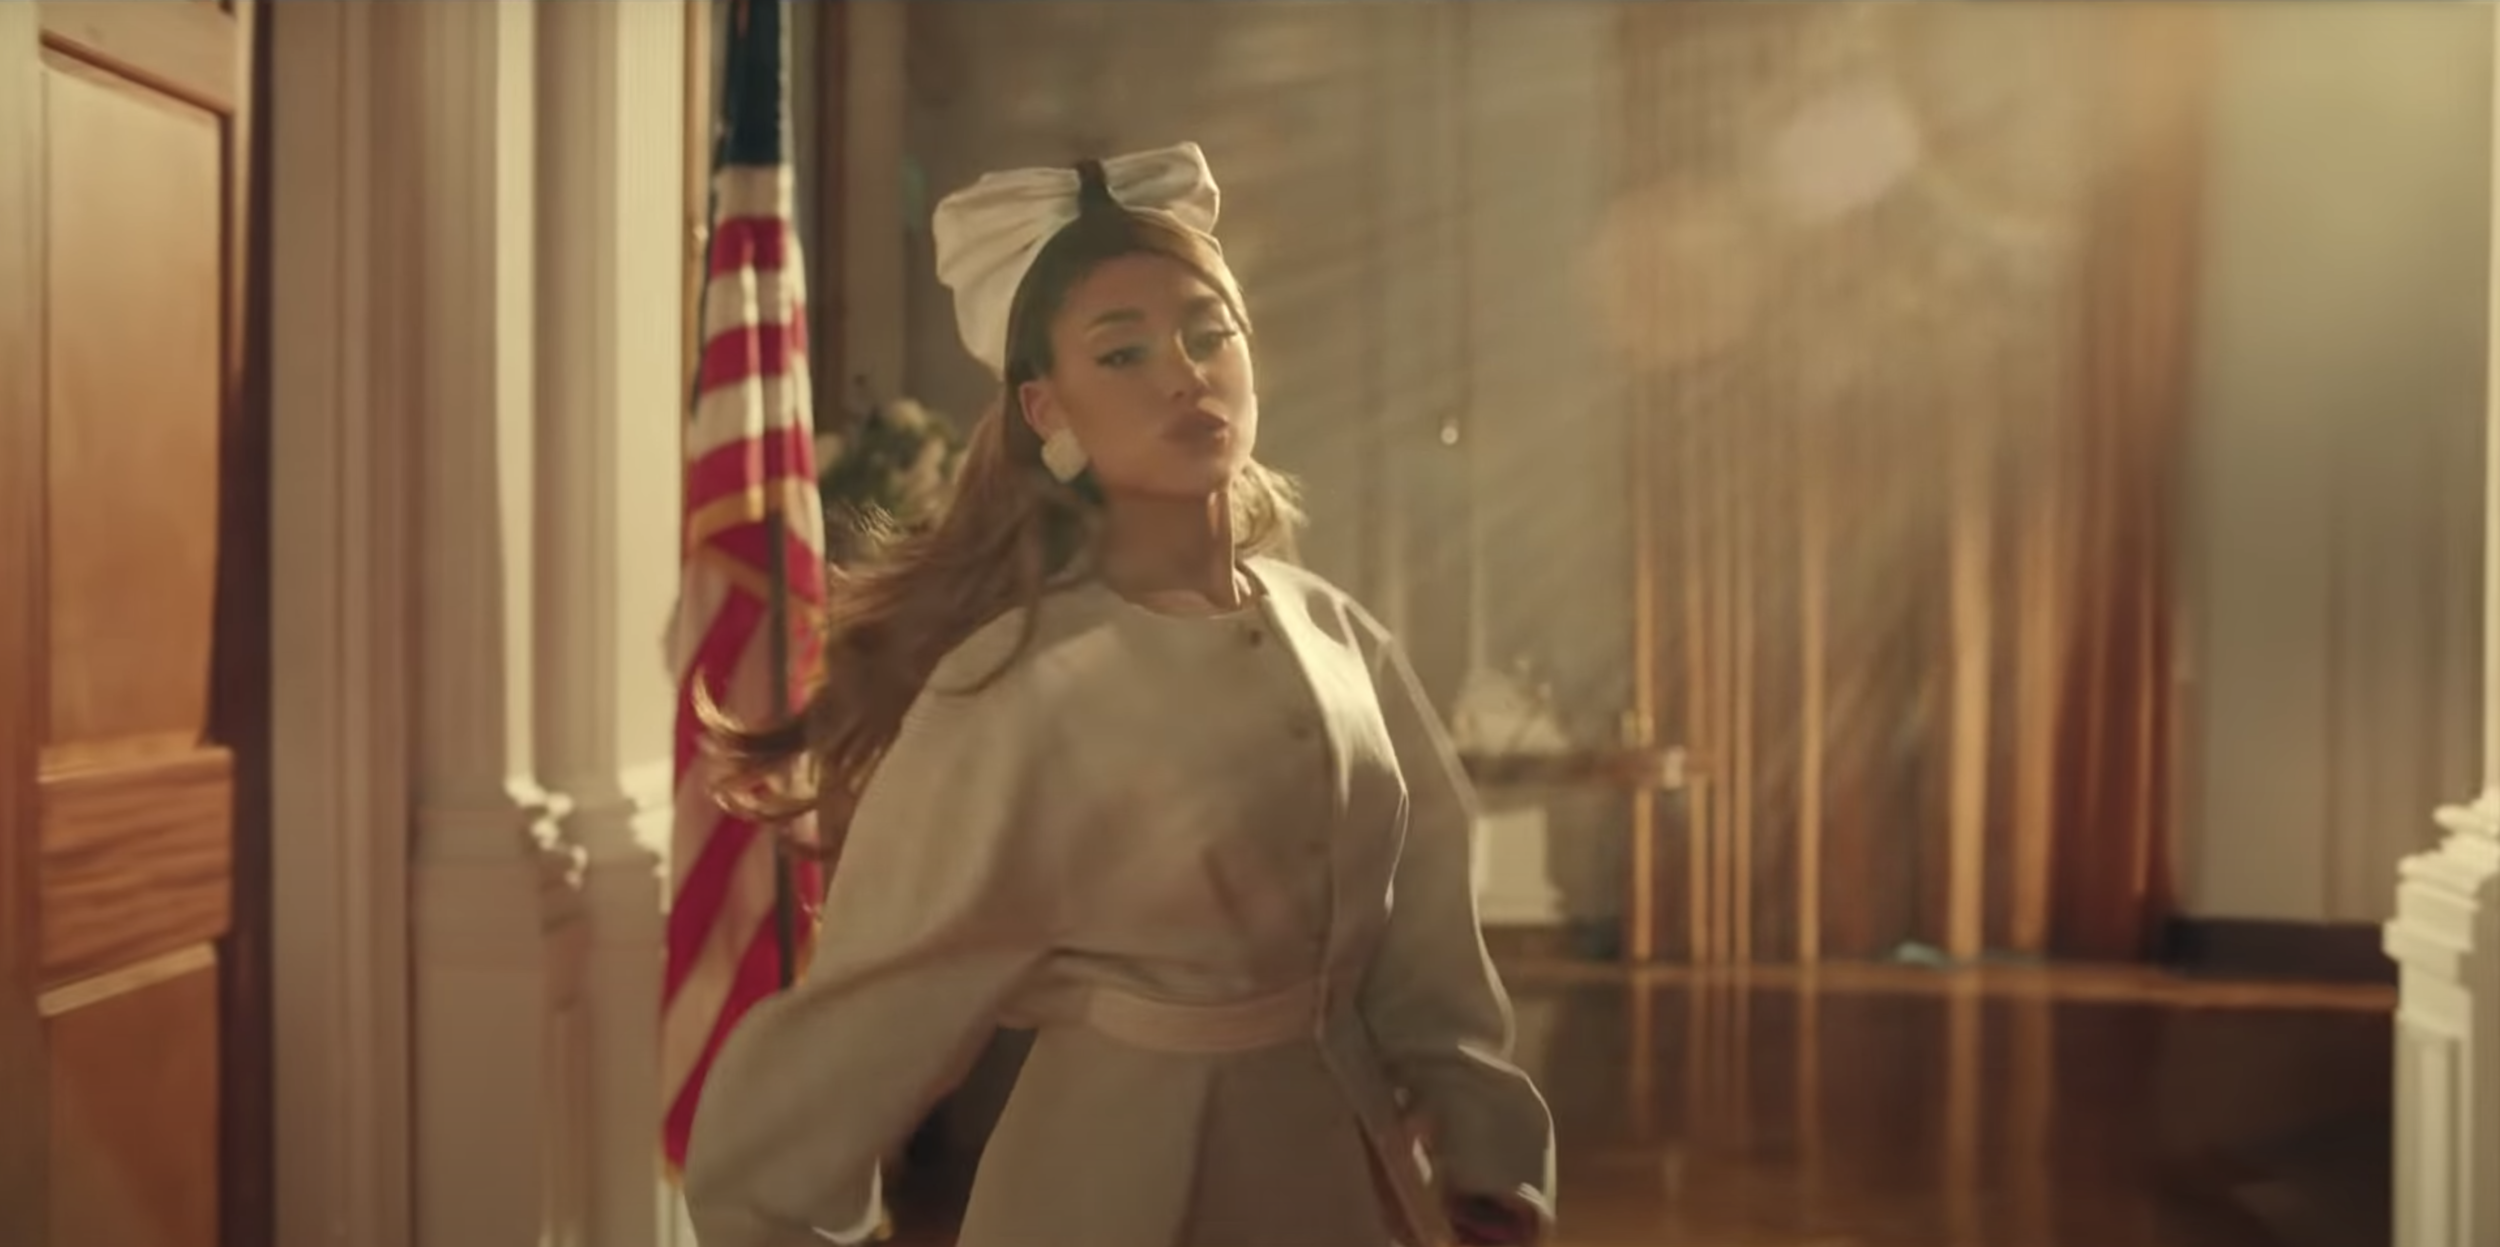 Ariana Grande's Positions Music Video Shows Fashion & Sexuality As Acts  of Politics